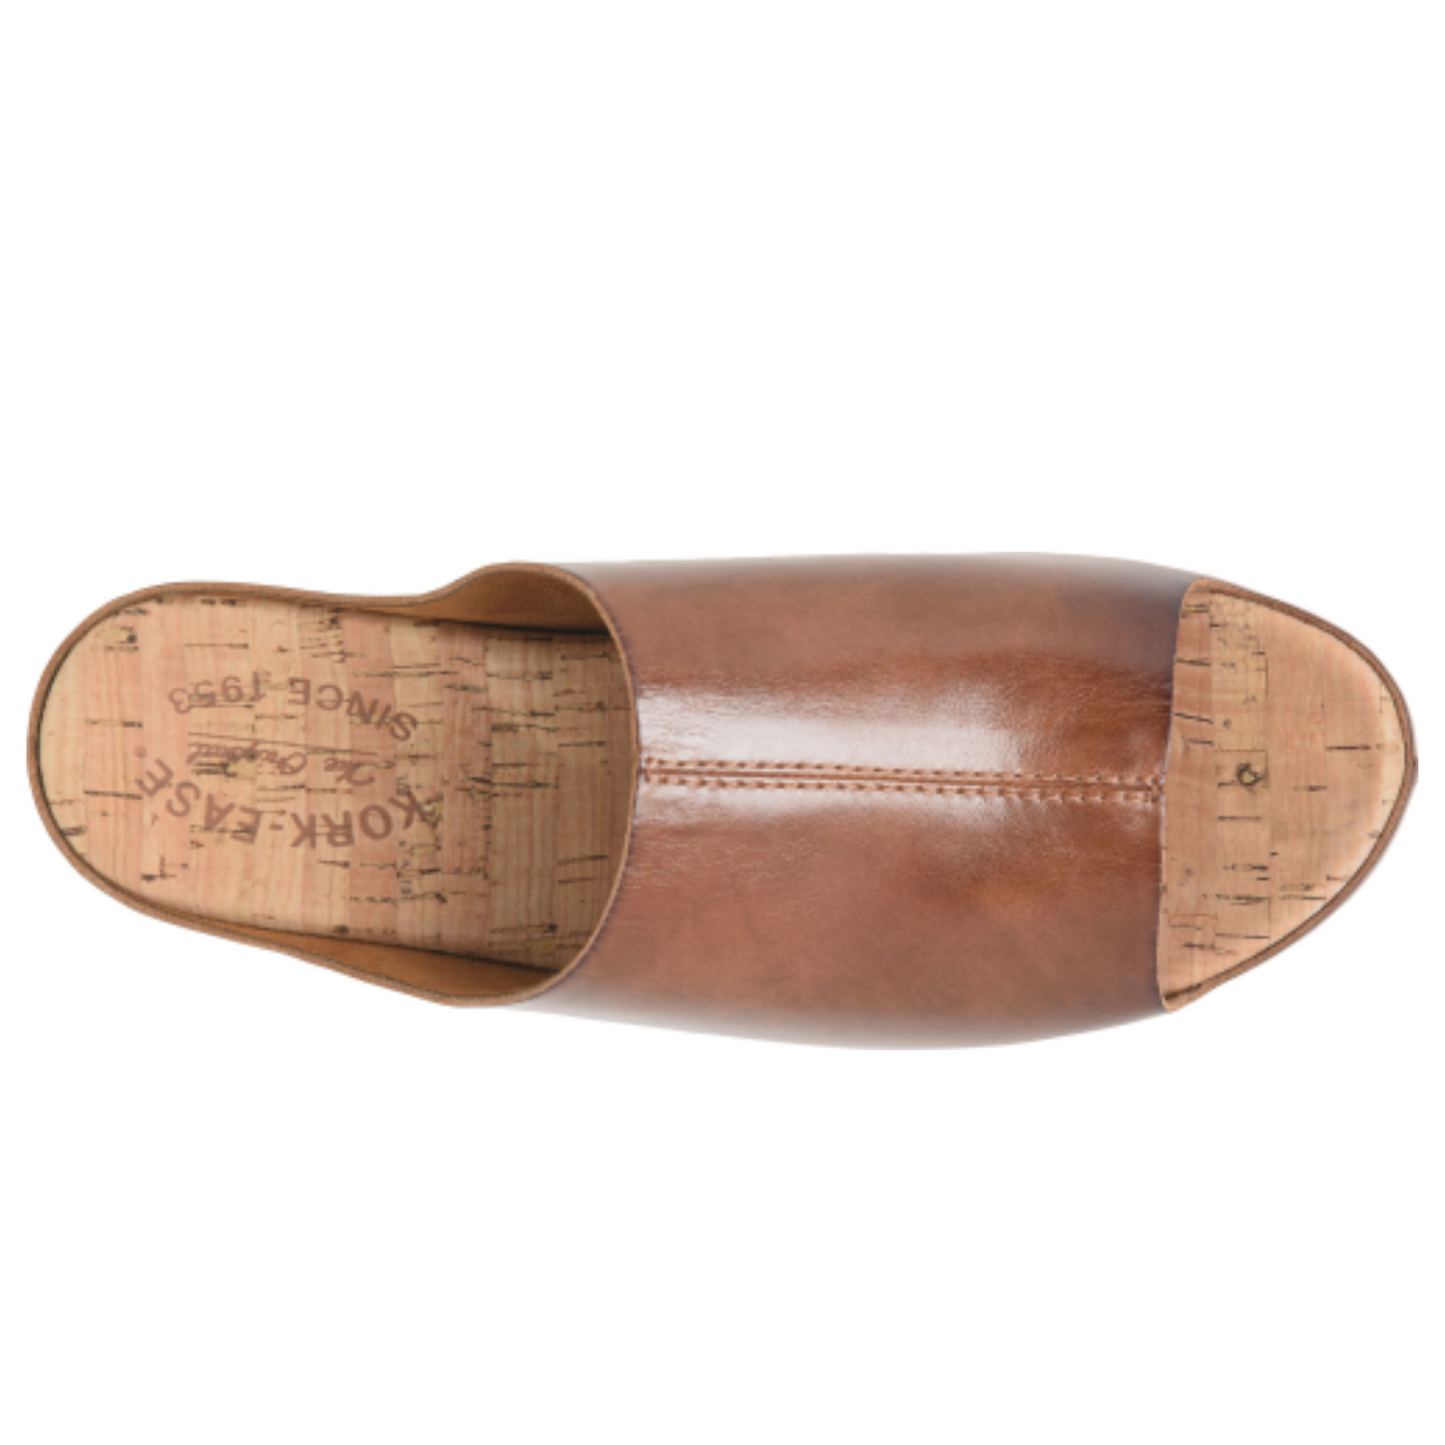 Top view of the Women's brown leather flatform slide sandal by Kork-Ease